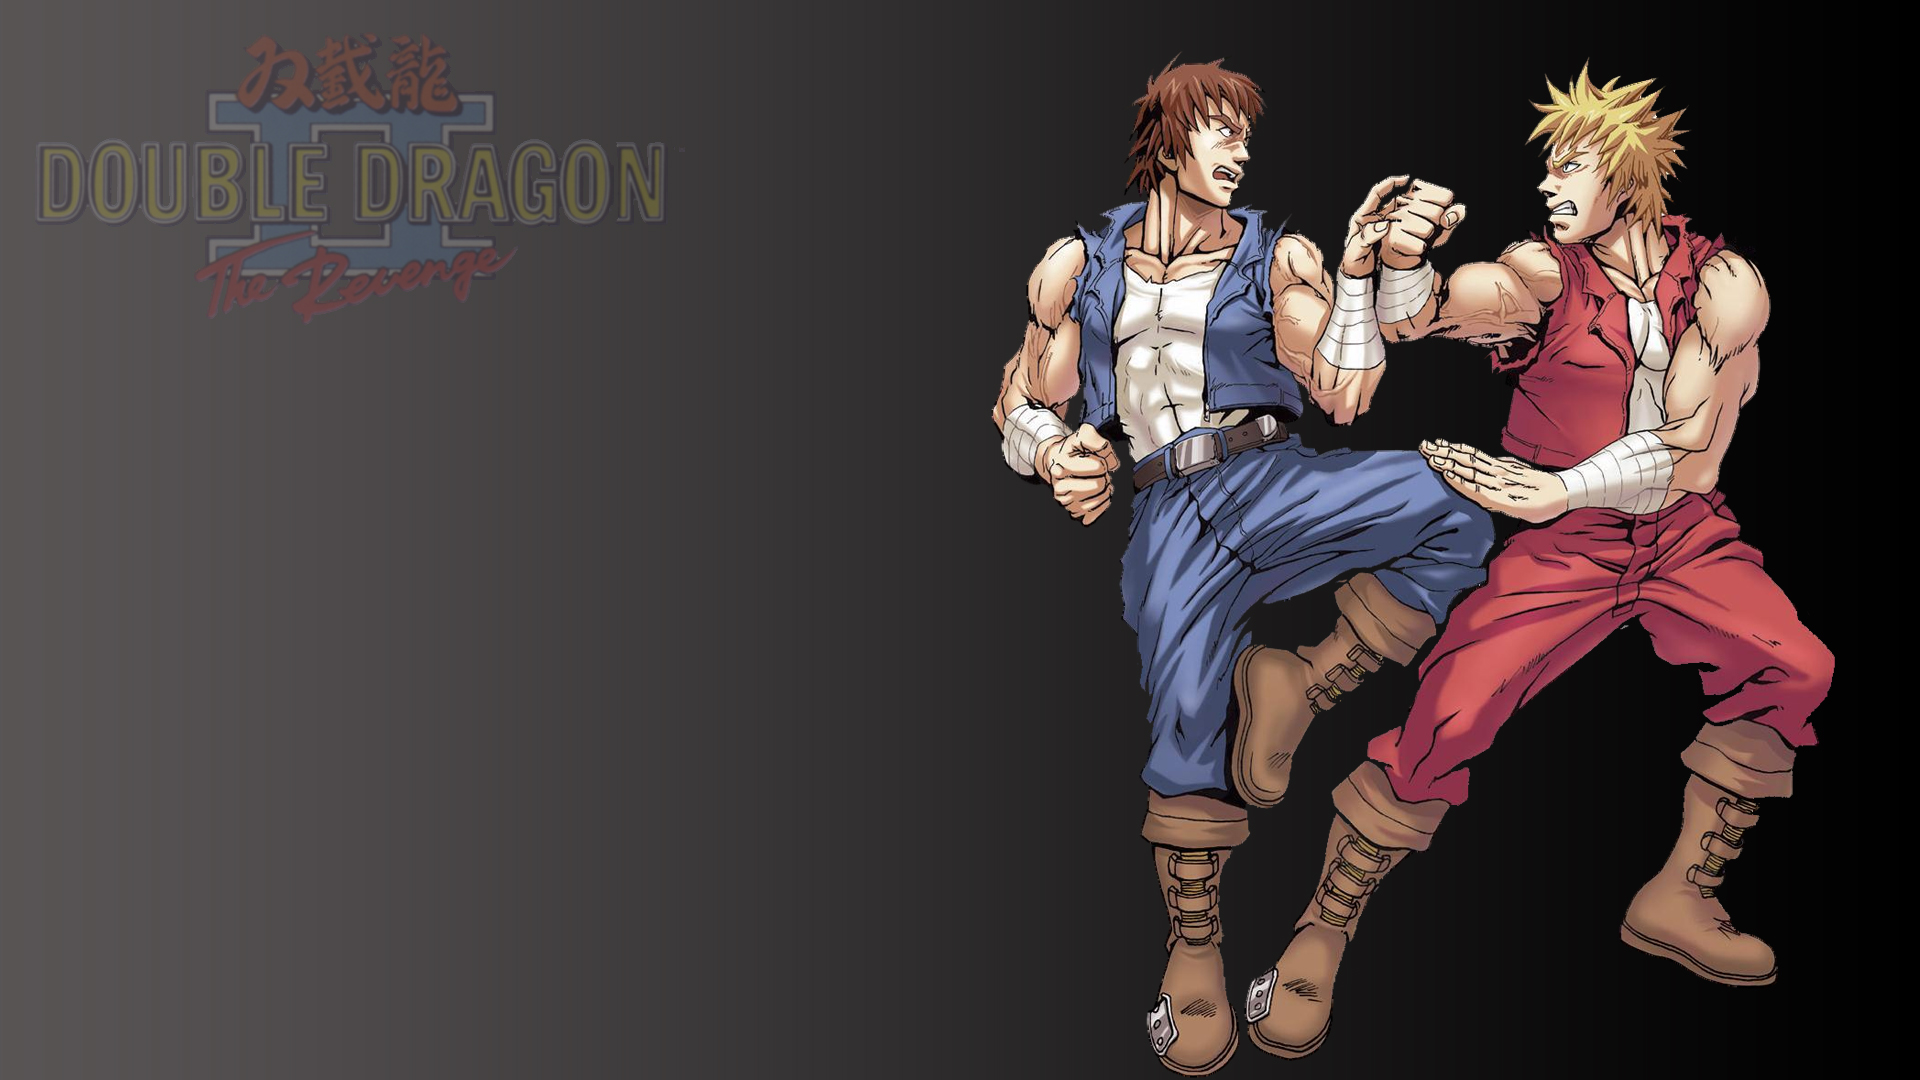 Video Game Double Dragon II: The Revenge HD Wallpaper | Background Image